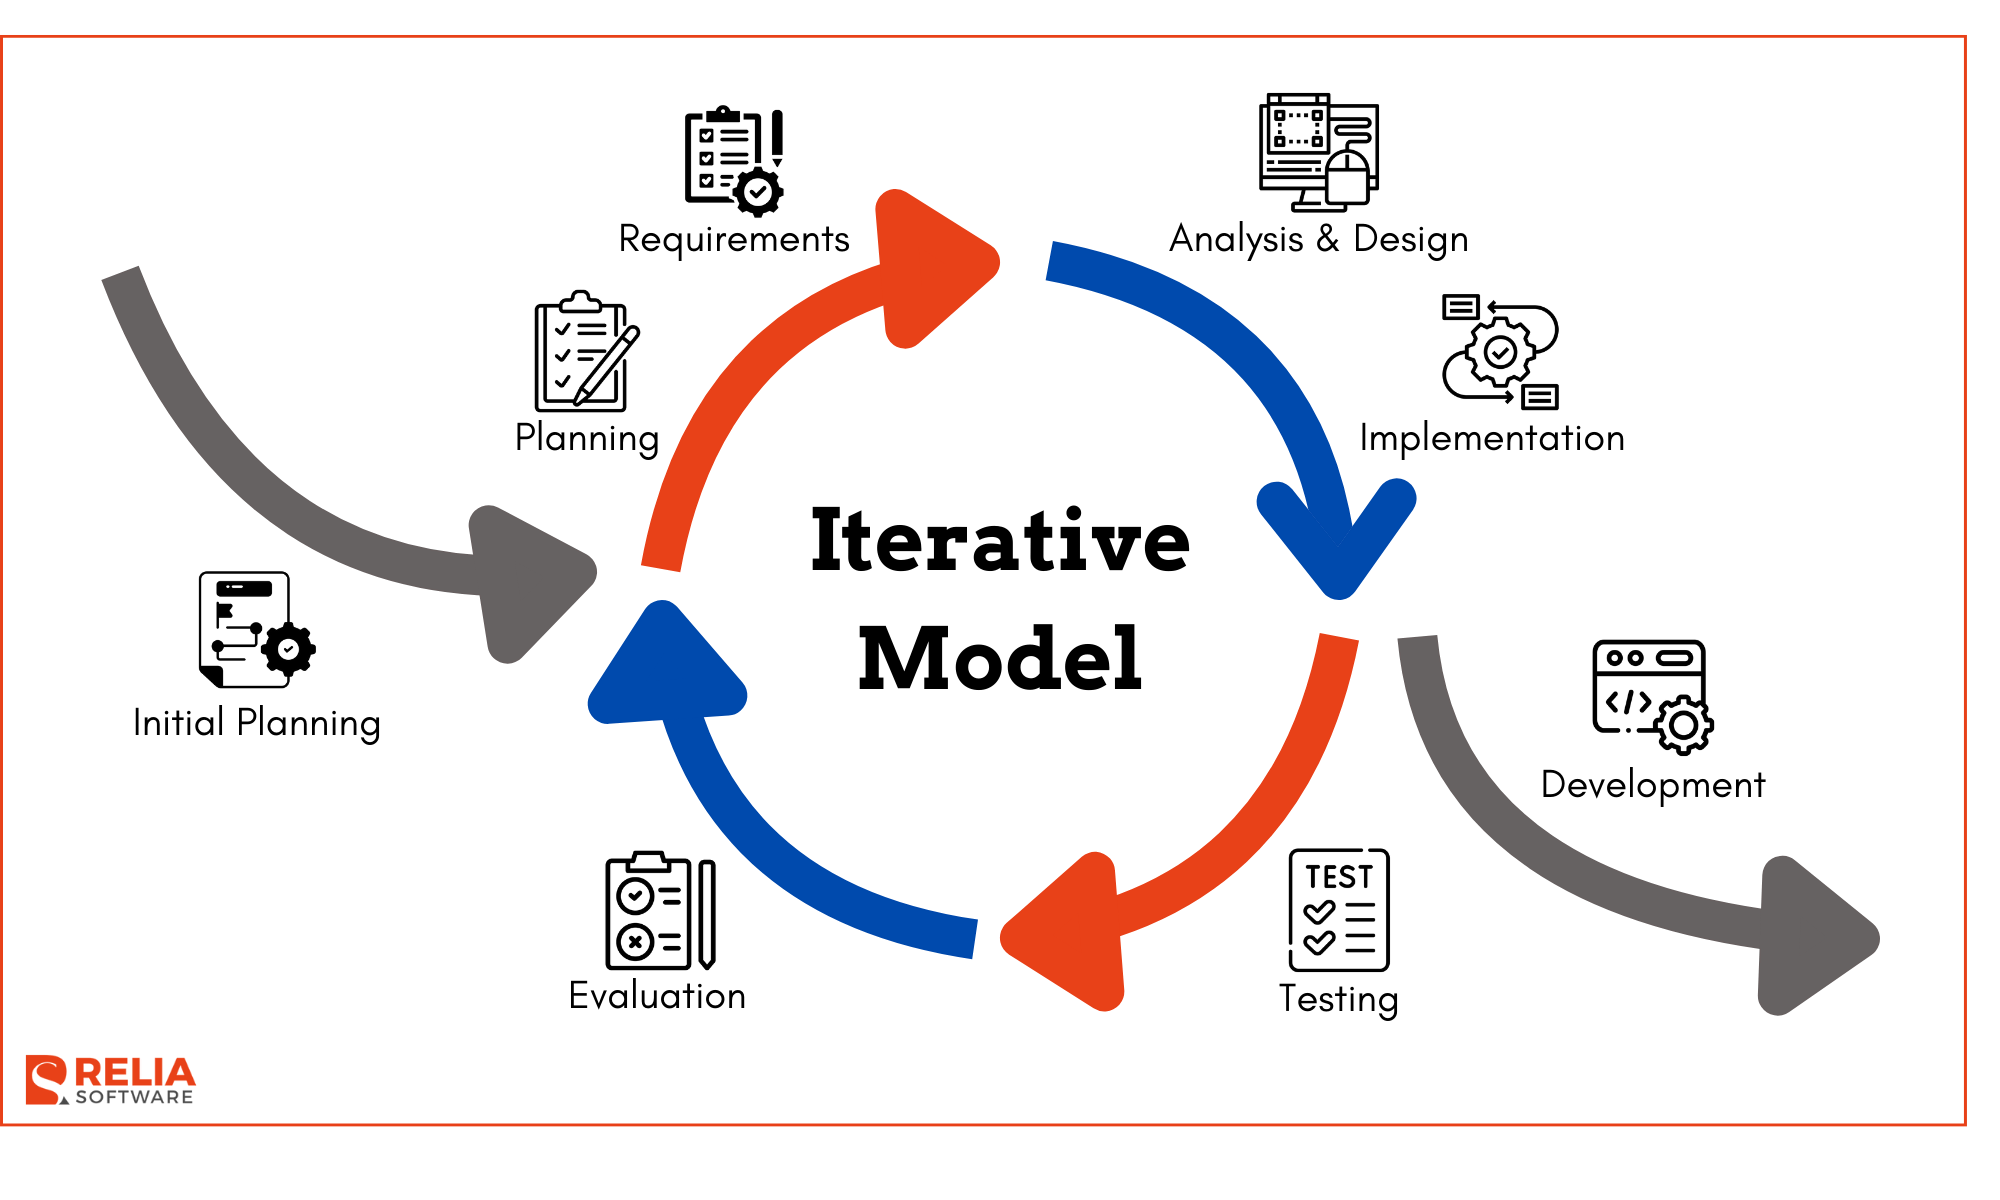 The Iterative Model is a software development approach that builds a system incrementally through repeated cycles (iterations).